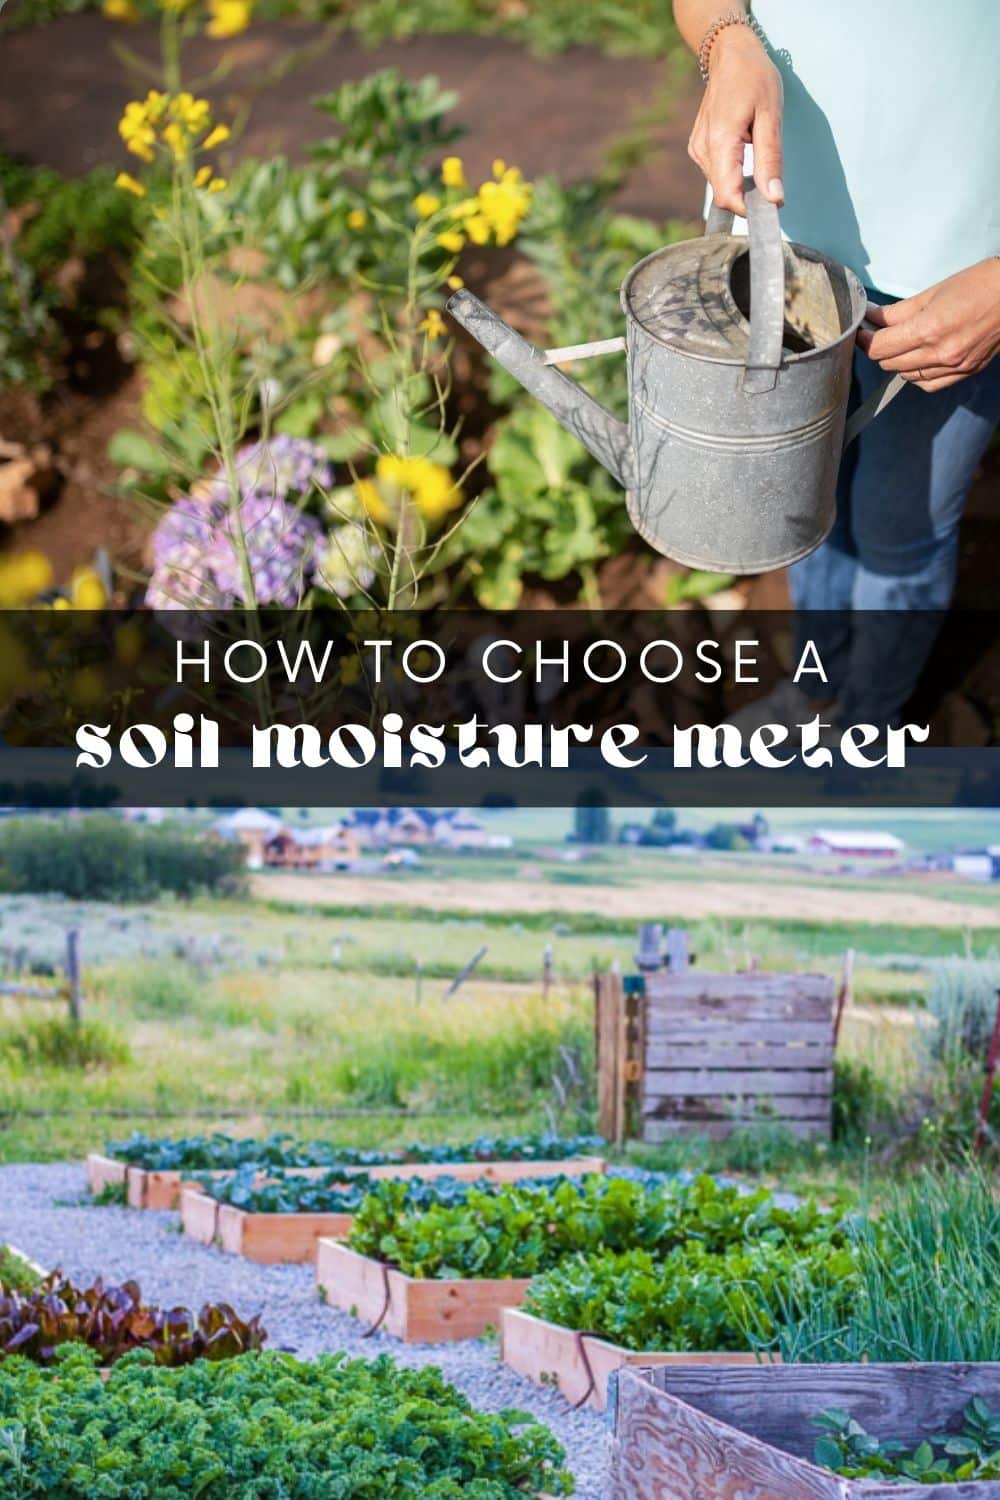 We all know that without water, plants cannot survive. But while a lack of water will kill a plant, too much can be just as hazardous. Navigating the right balance can be tricky, even for the most experienced gardener! Luckily, there is a tool that can help: a soil moisture meter.